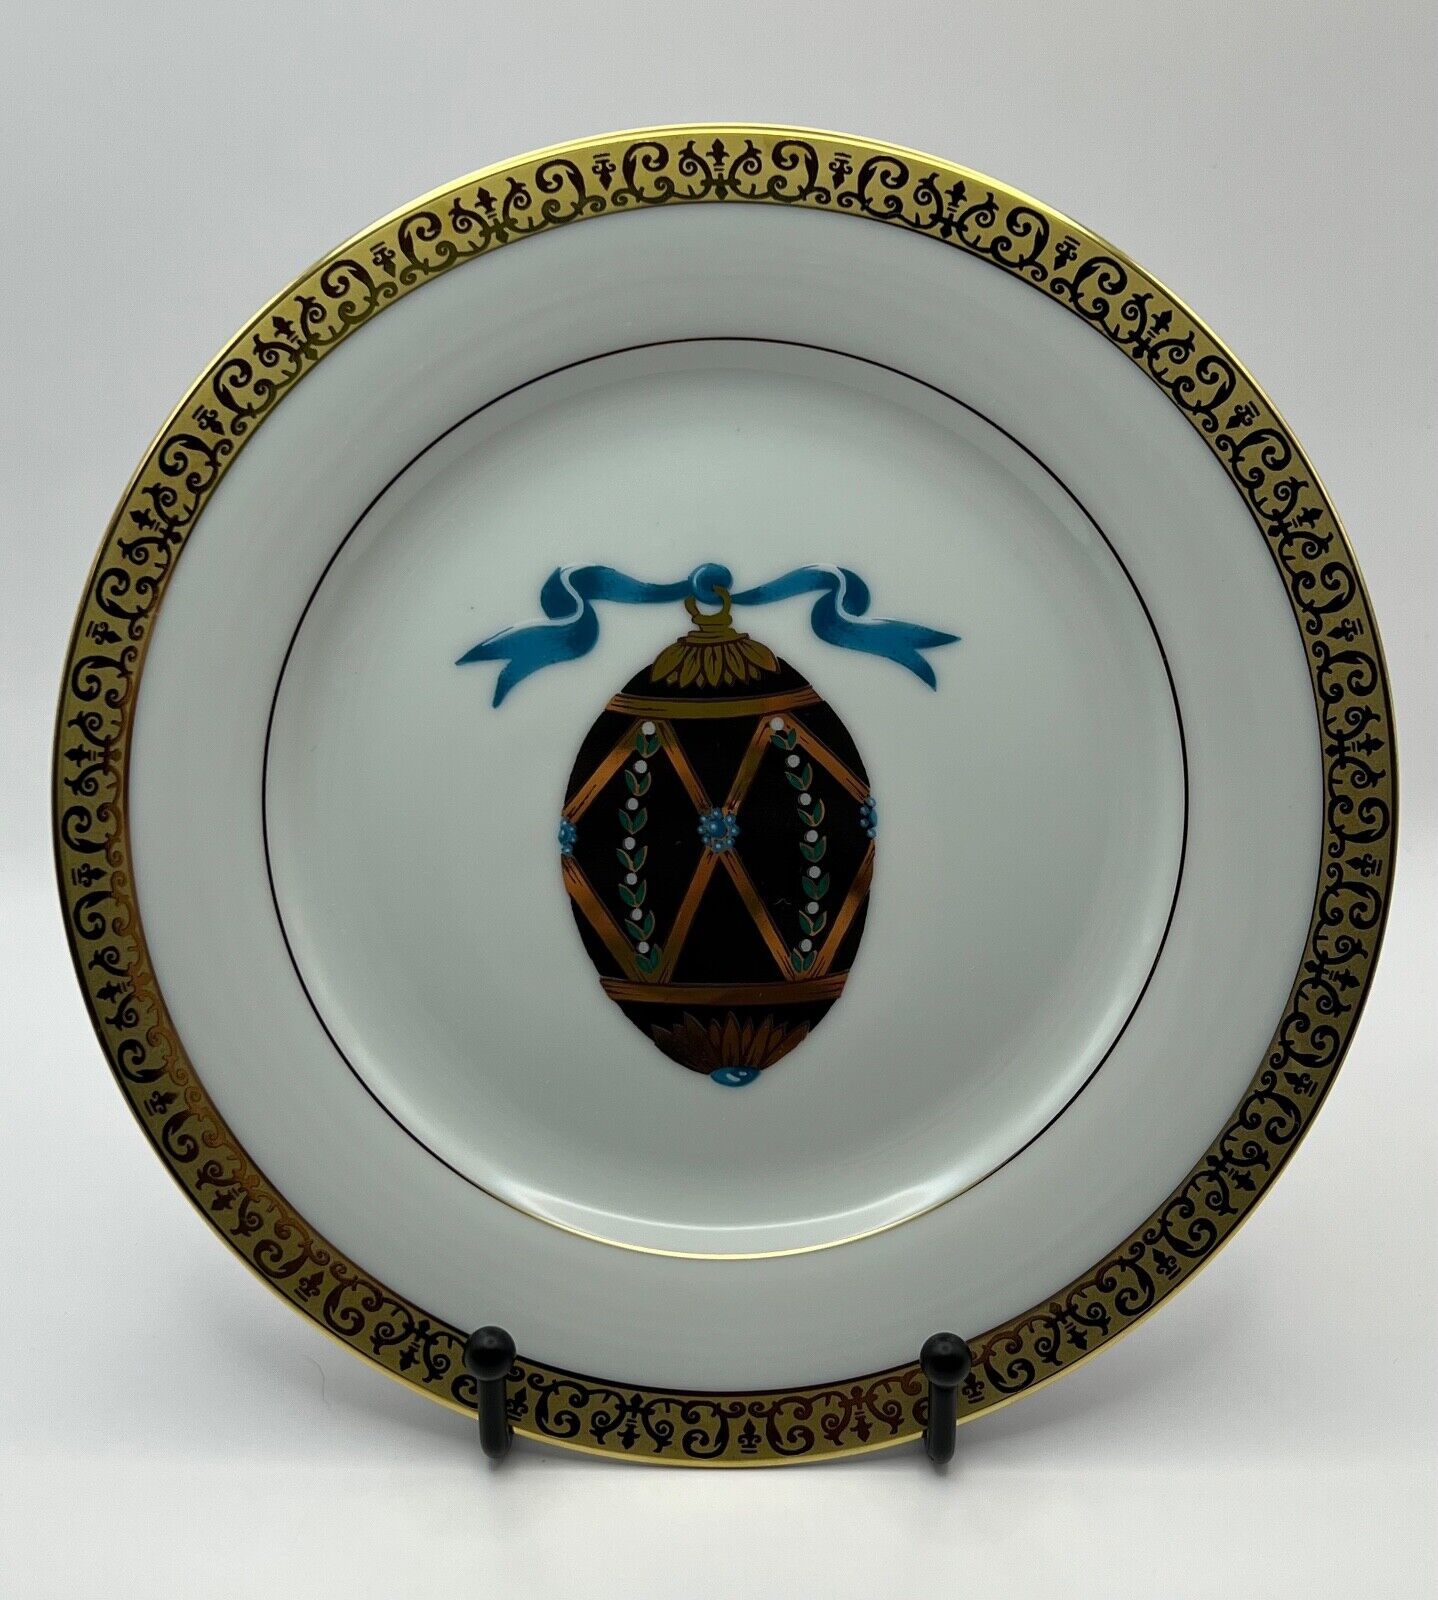 Gold Buffet Faberge Egg Design Dessert Plate(s) by Royal Gallery